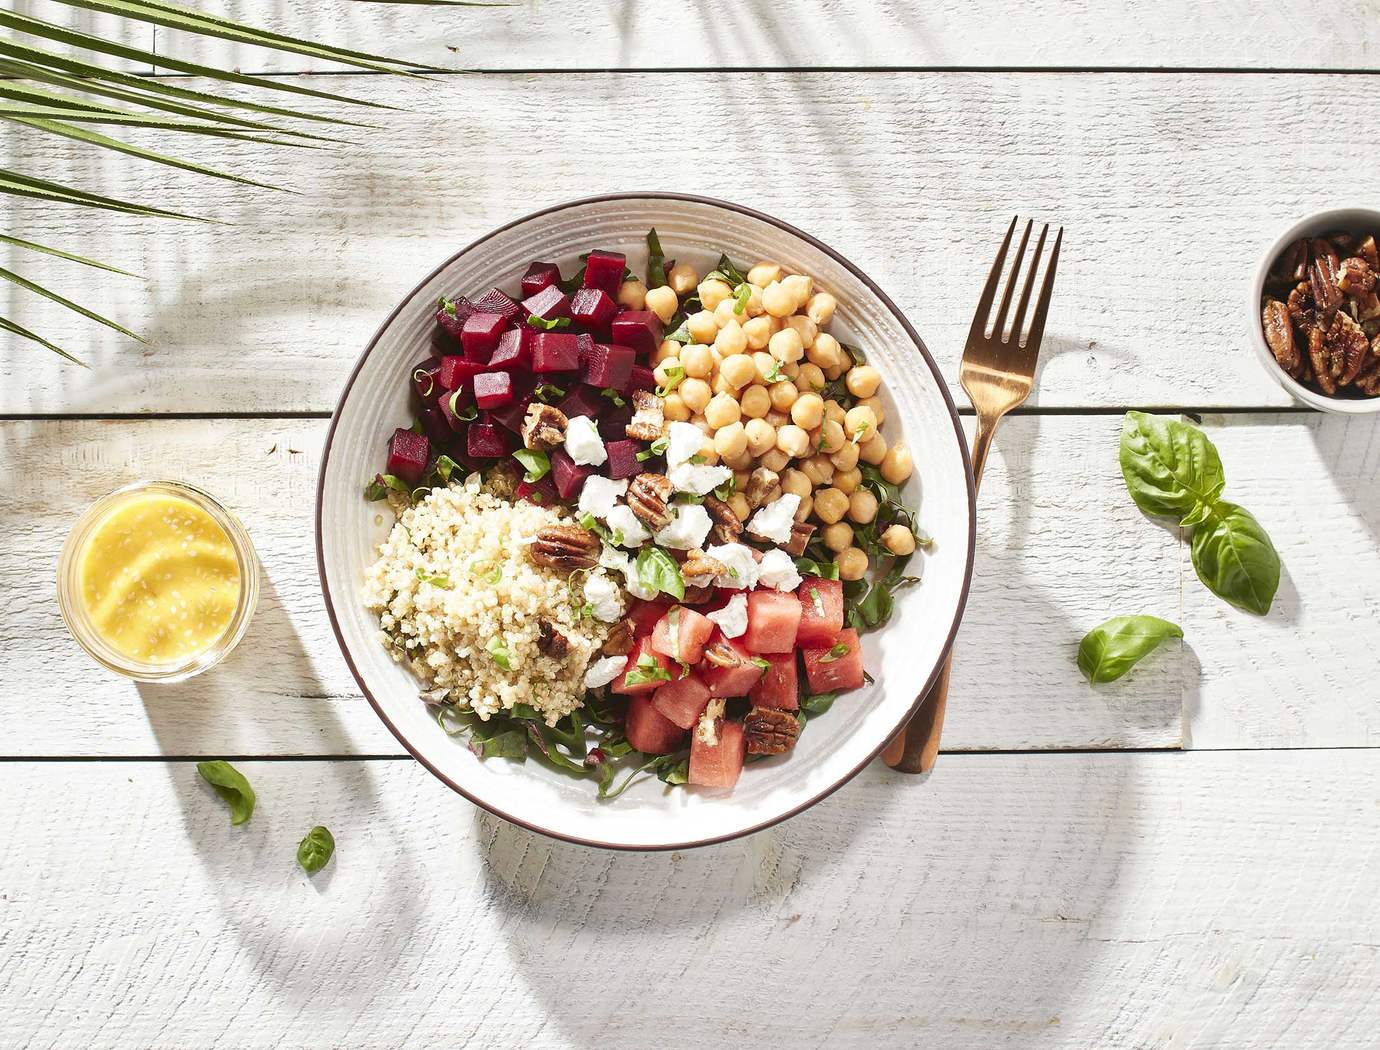 Chickpeas and beets veggie bowl with watermelon